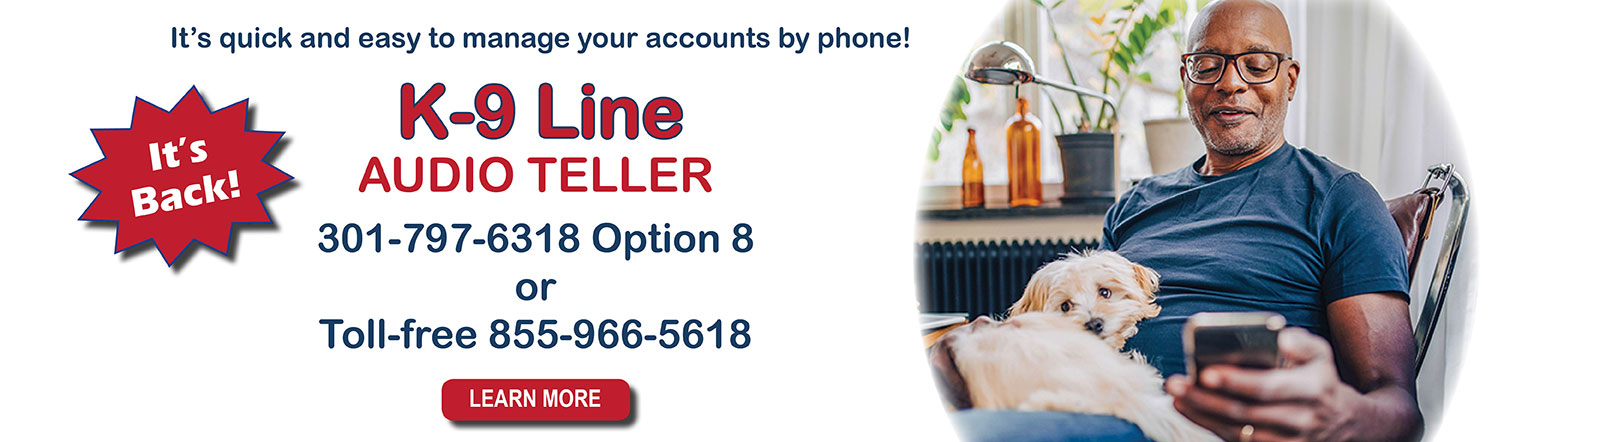 It's quick and easy to manage your accounts by phone with K-9 Line. Call 301-797-6318 option 8.